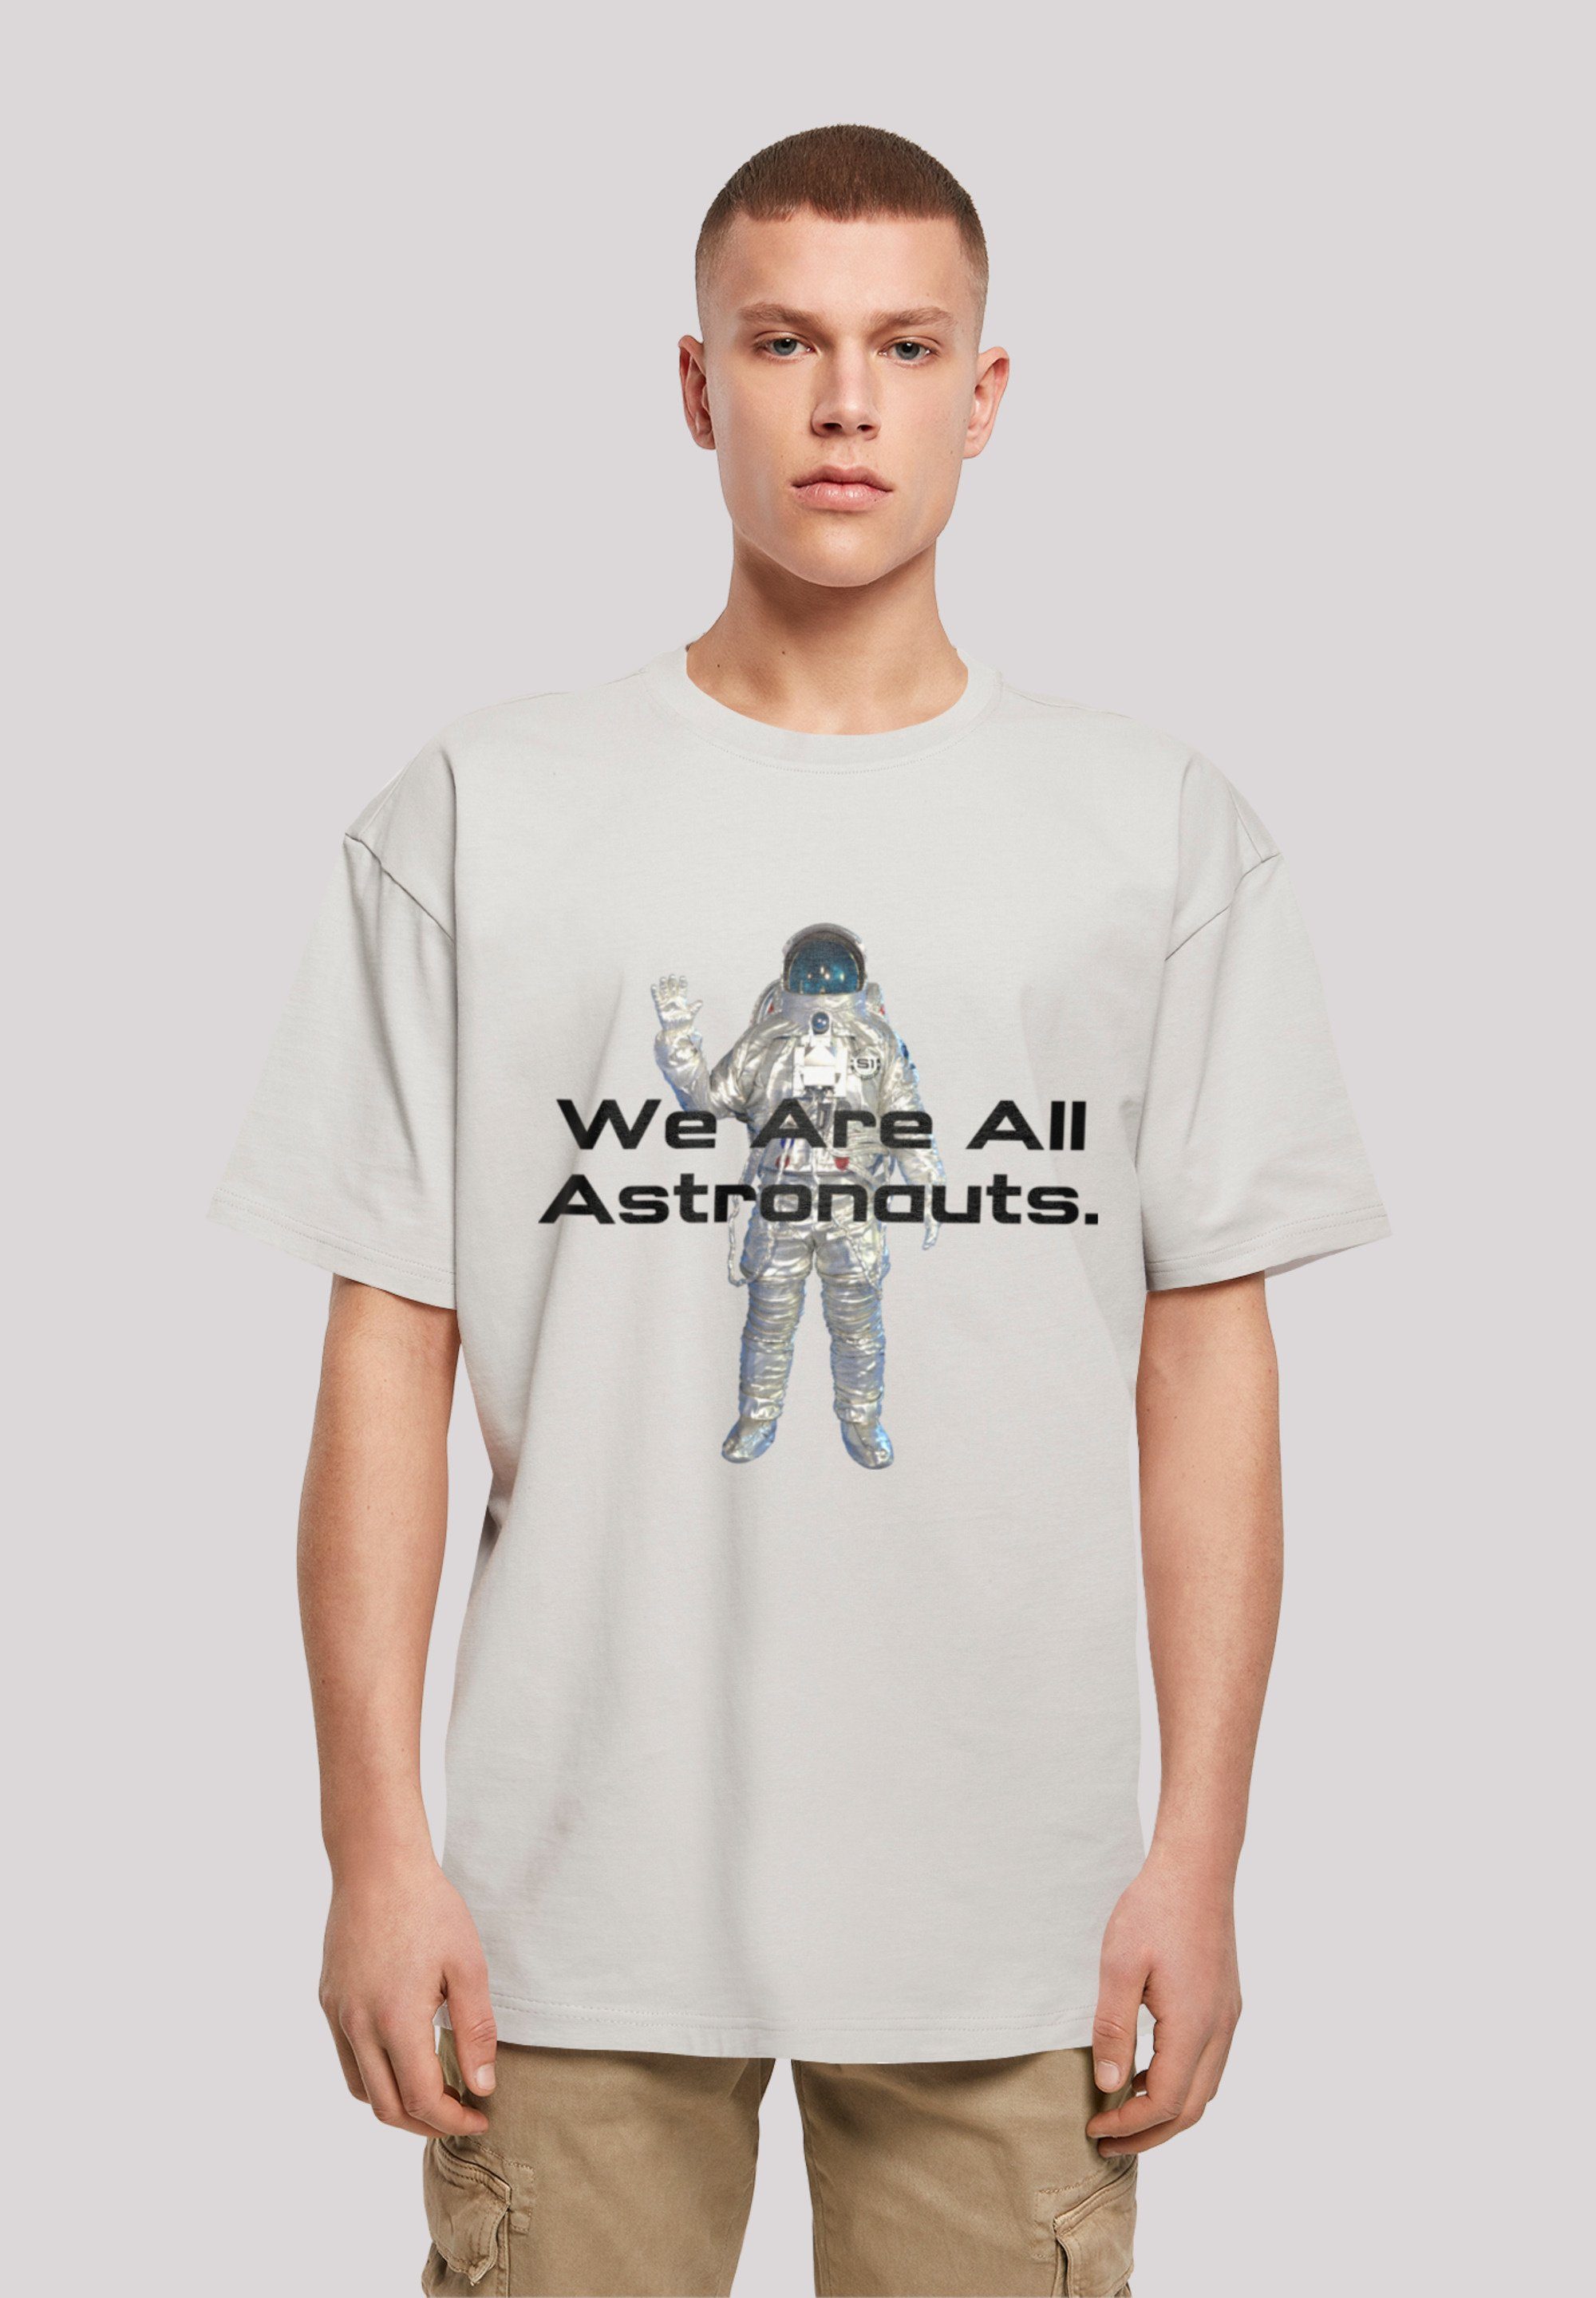 T-Shirt We PHIBER SpaceOne lightasphalt astronauts are all F4NT4STIC Print